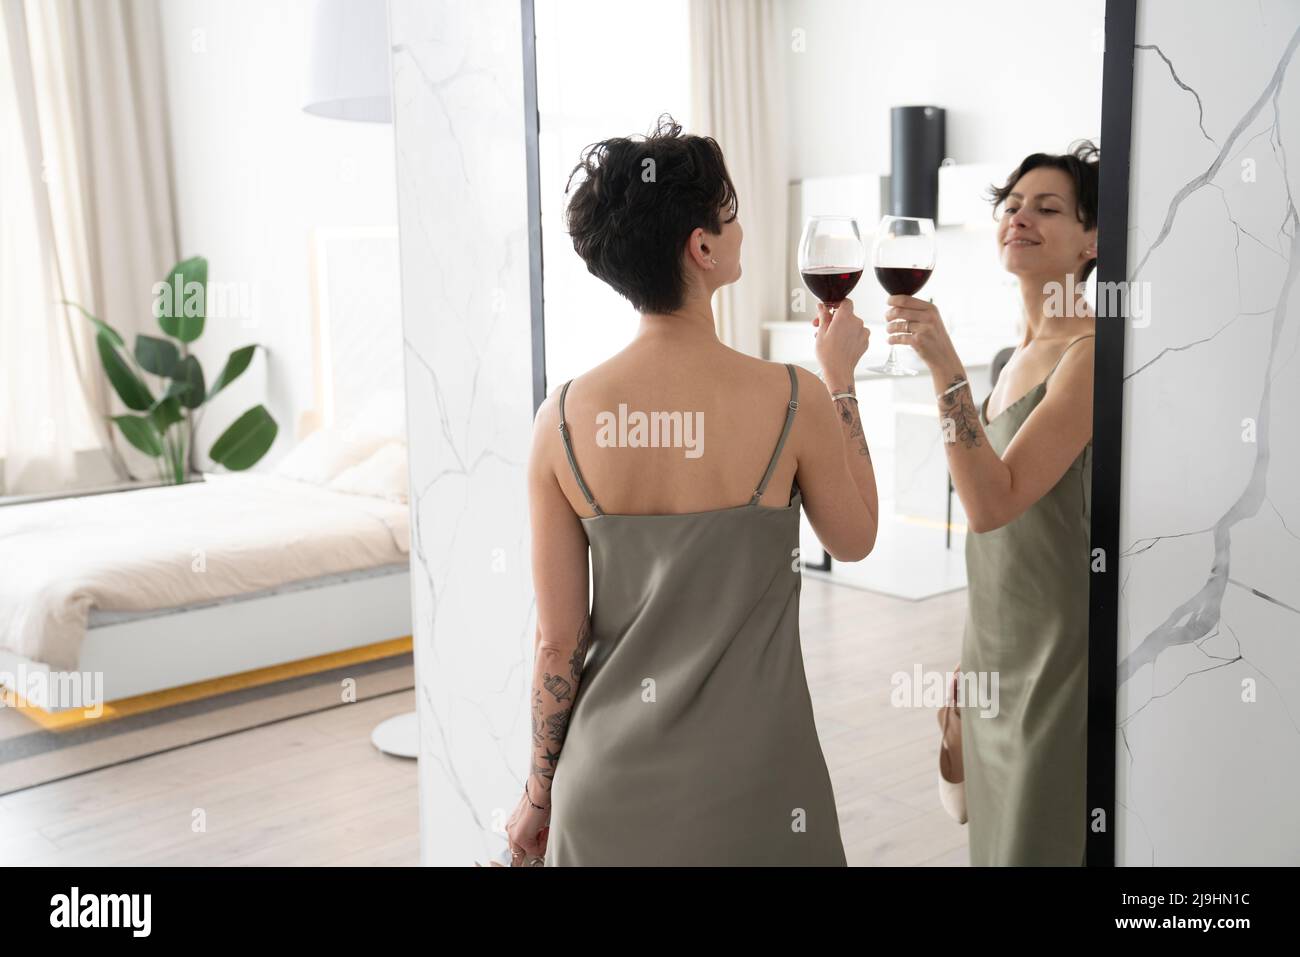 Smiling woman toasting wineglass at reflection on mirror at home Stock Photo